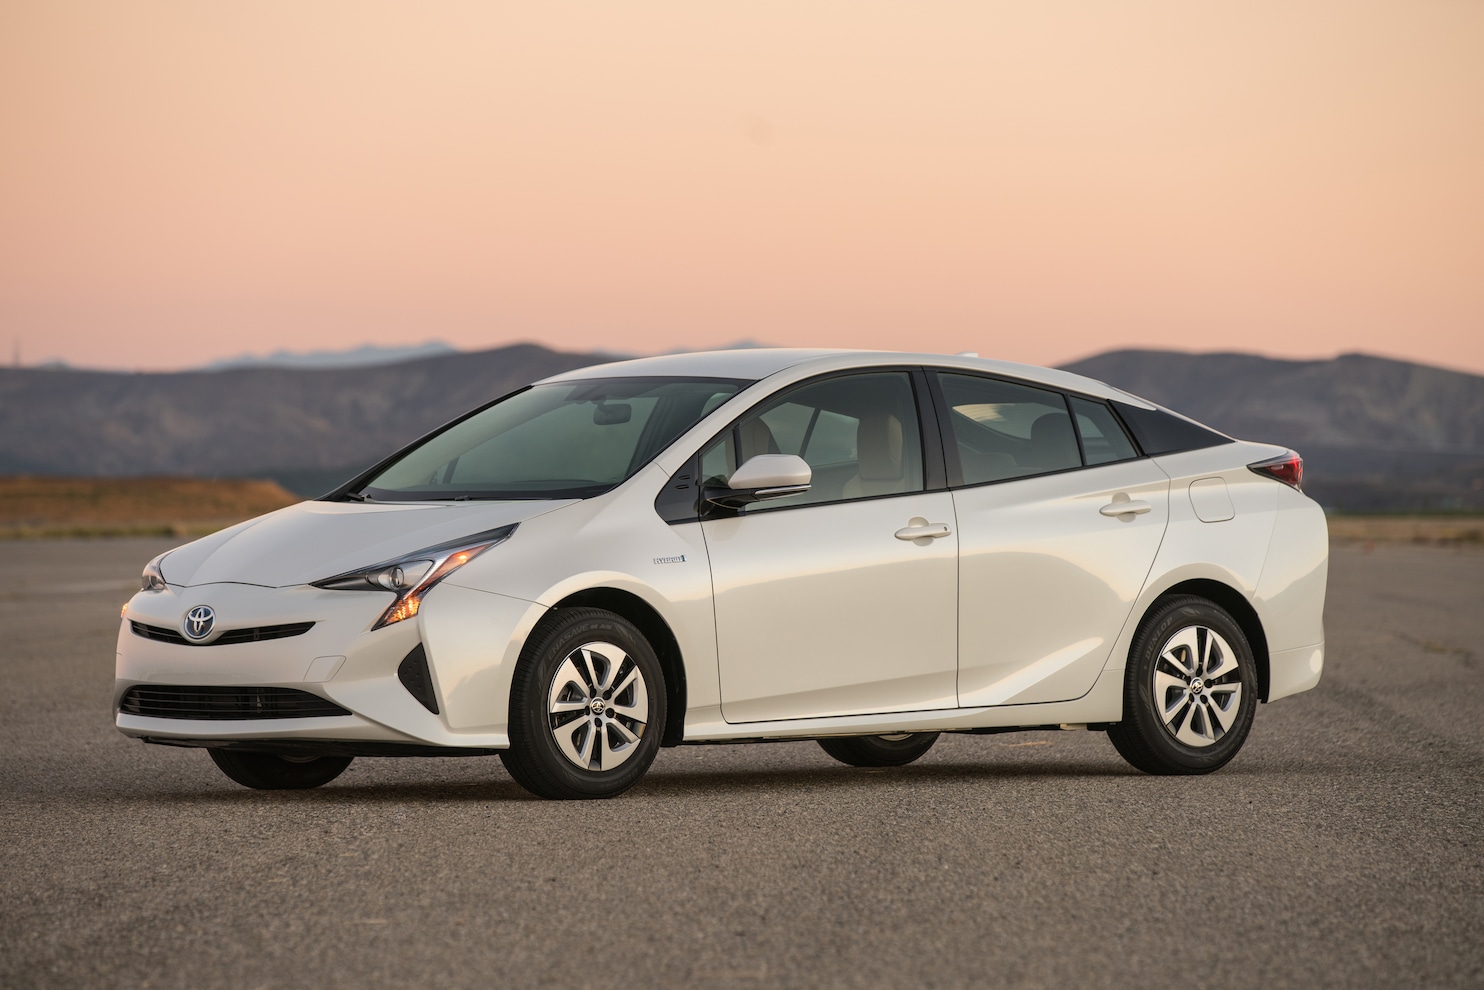 Toyota's Prius Two: Getting 54 miles per gallon isn't even its best trait -  The Washington Post